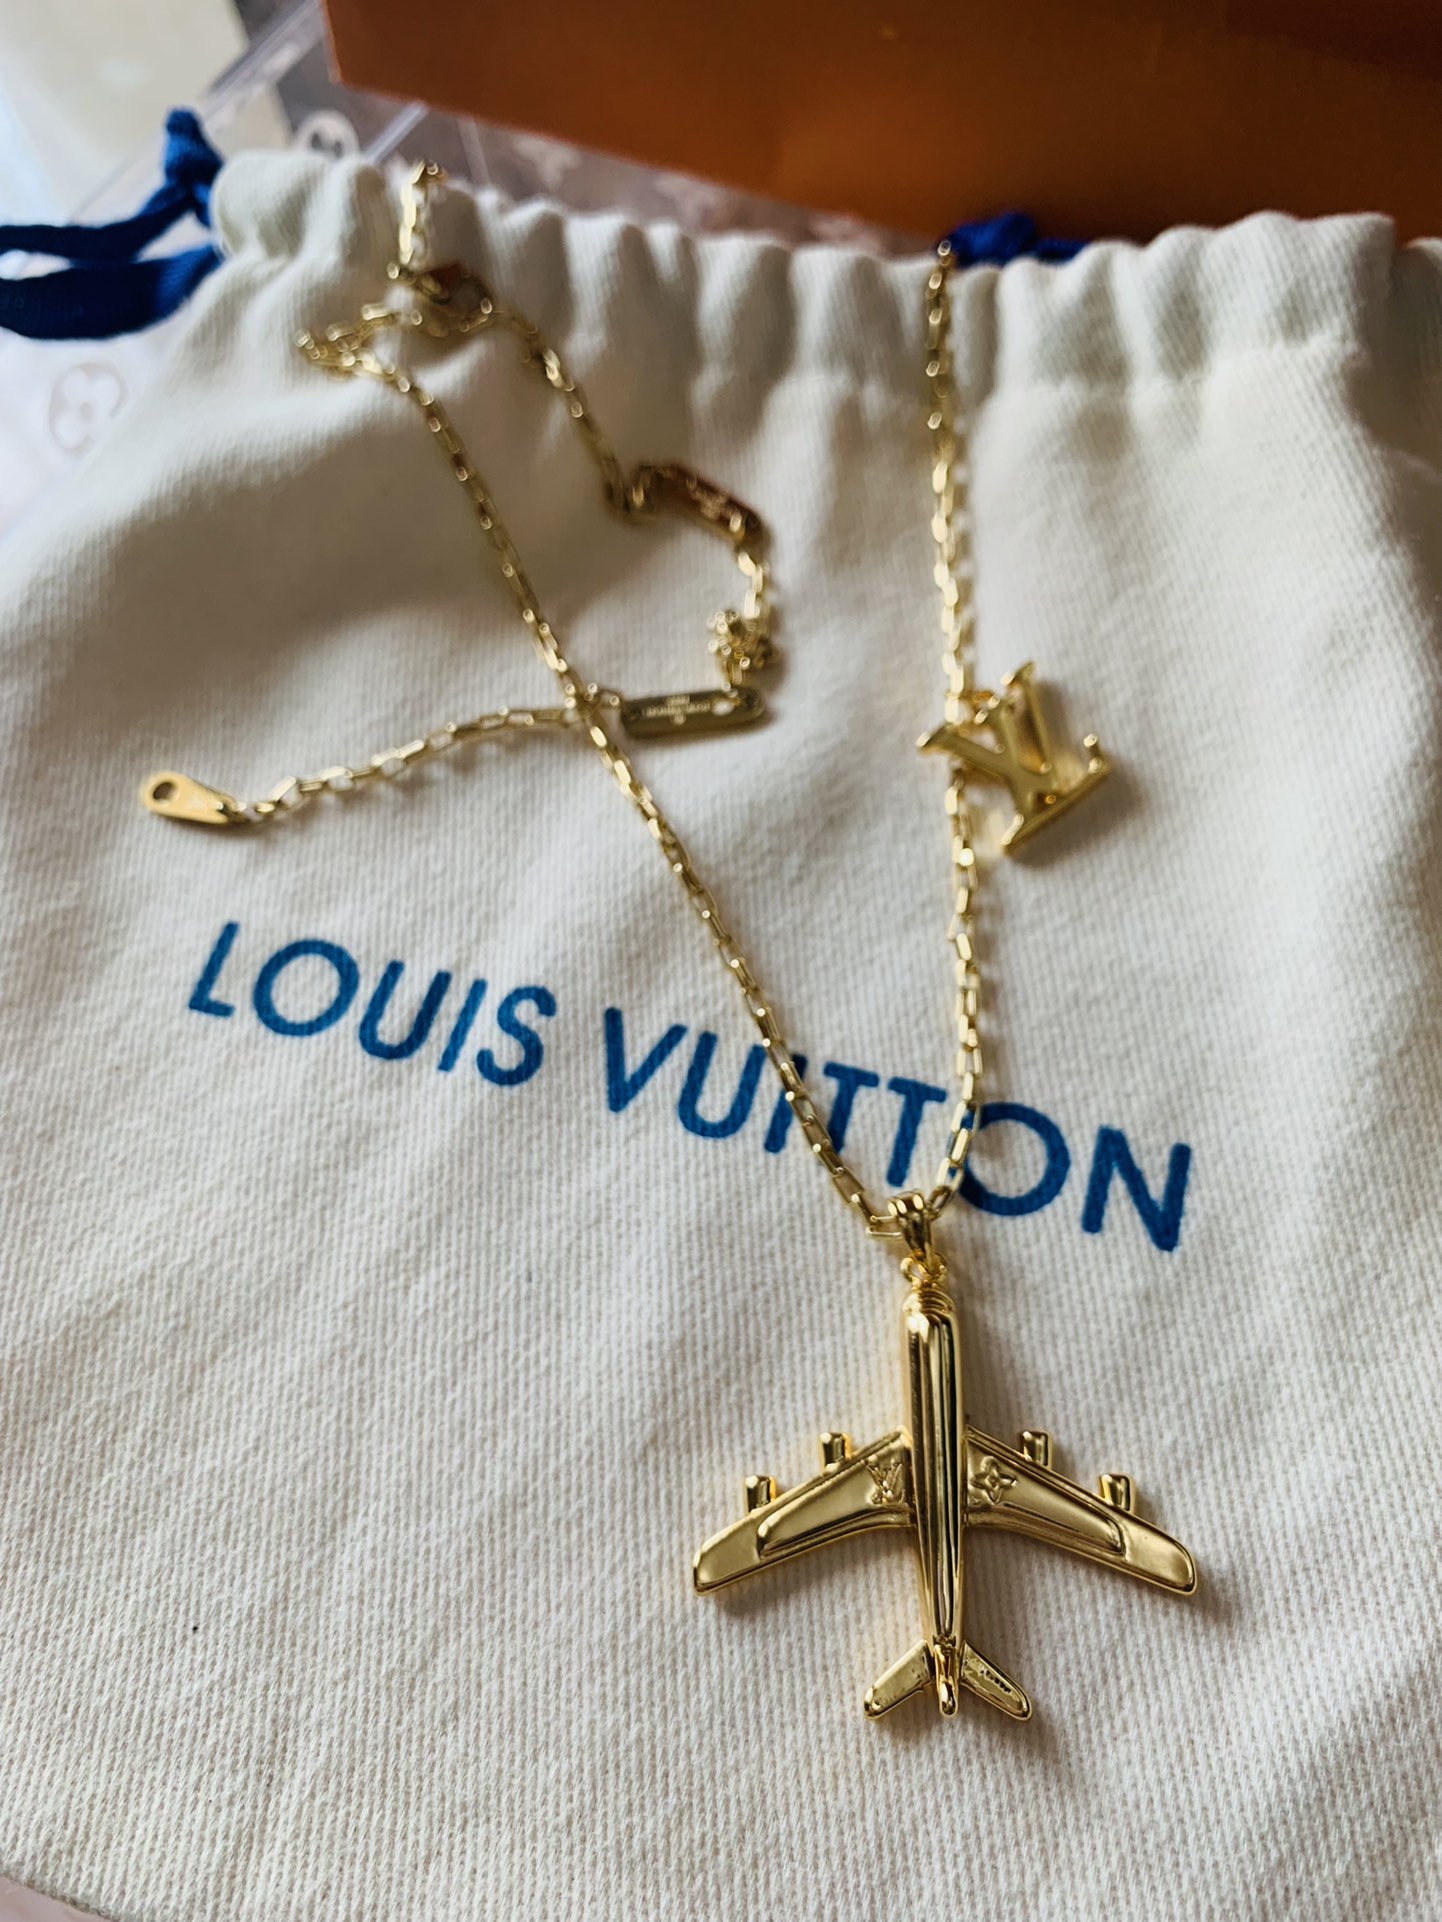 Plane Necklace continues the exploration journey of the 2021